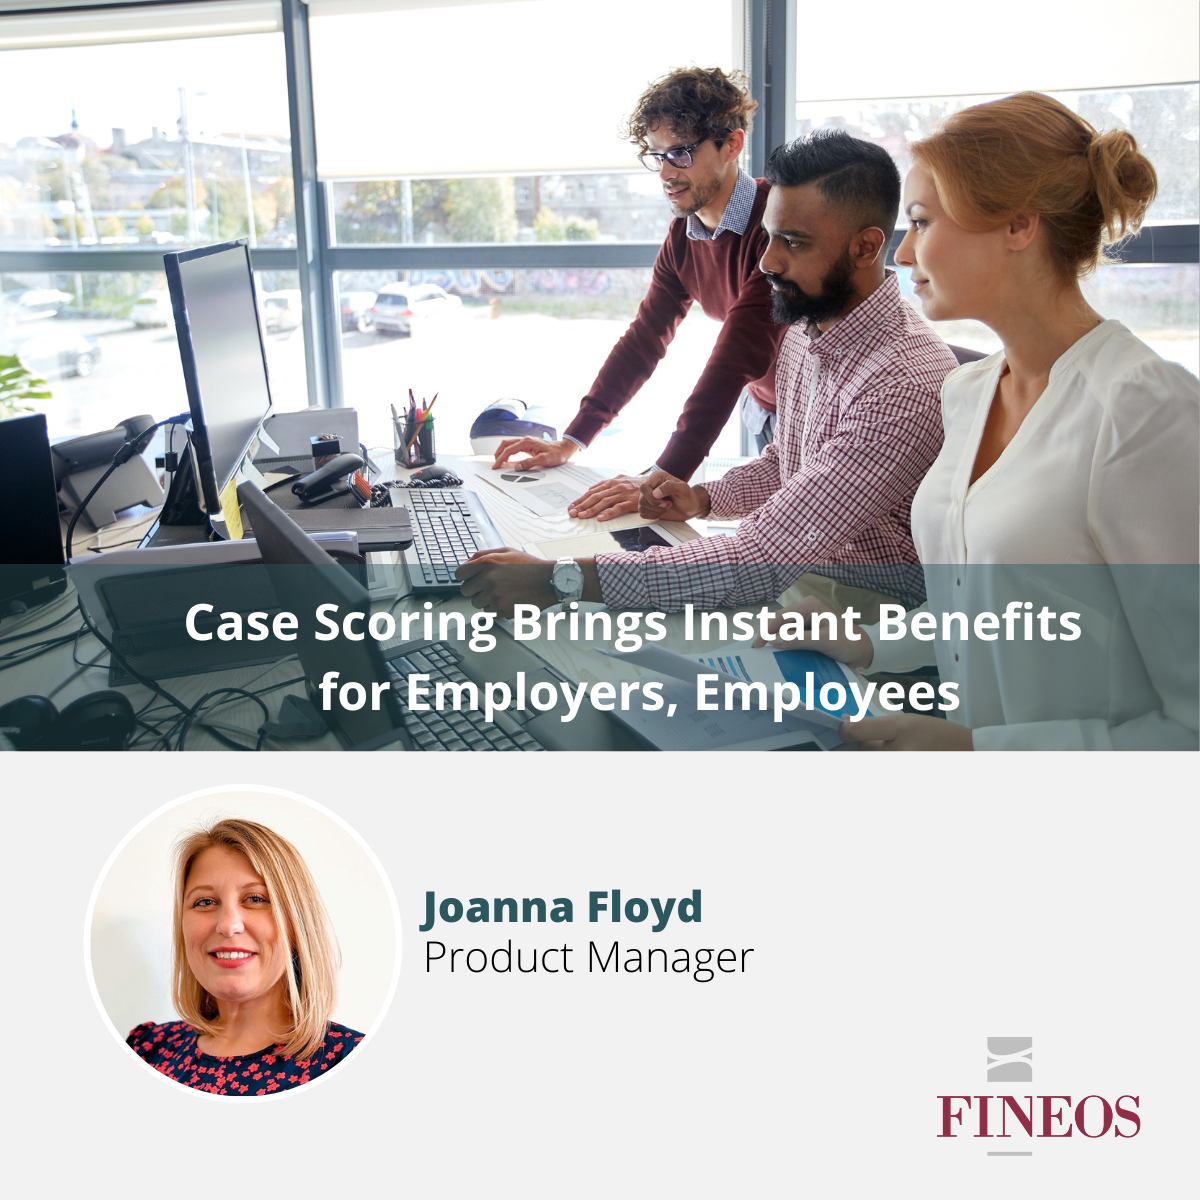 Case Scoring Brings Instant Benefits for Employers, Employees